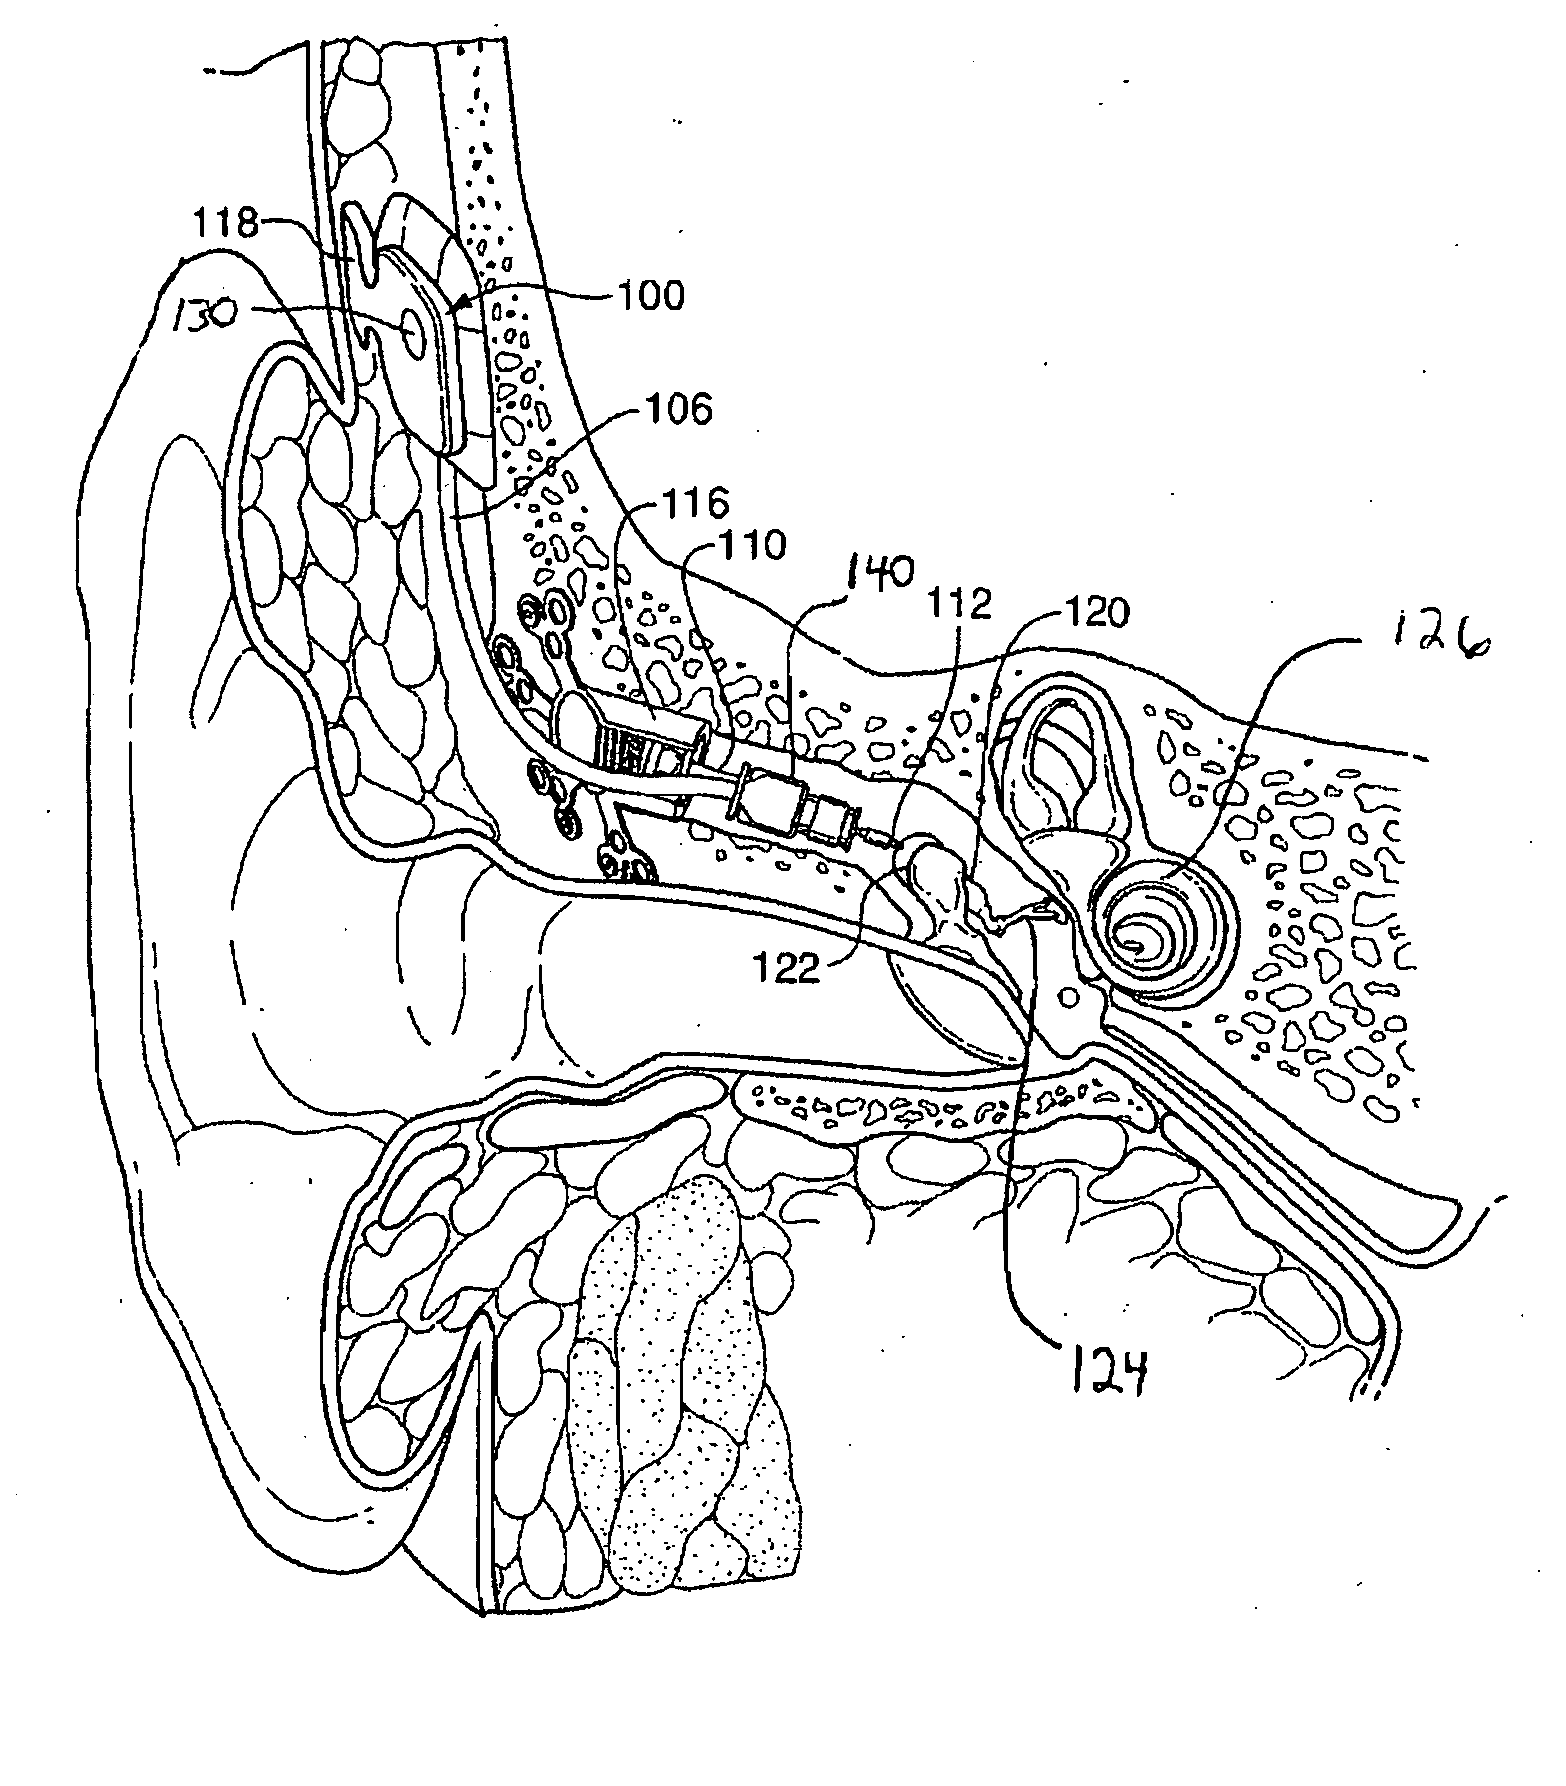 Implantable transducer with transverse force application